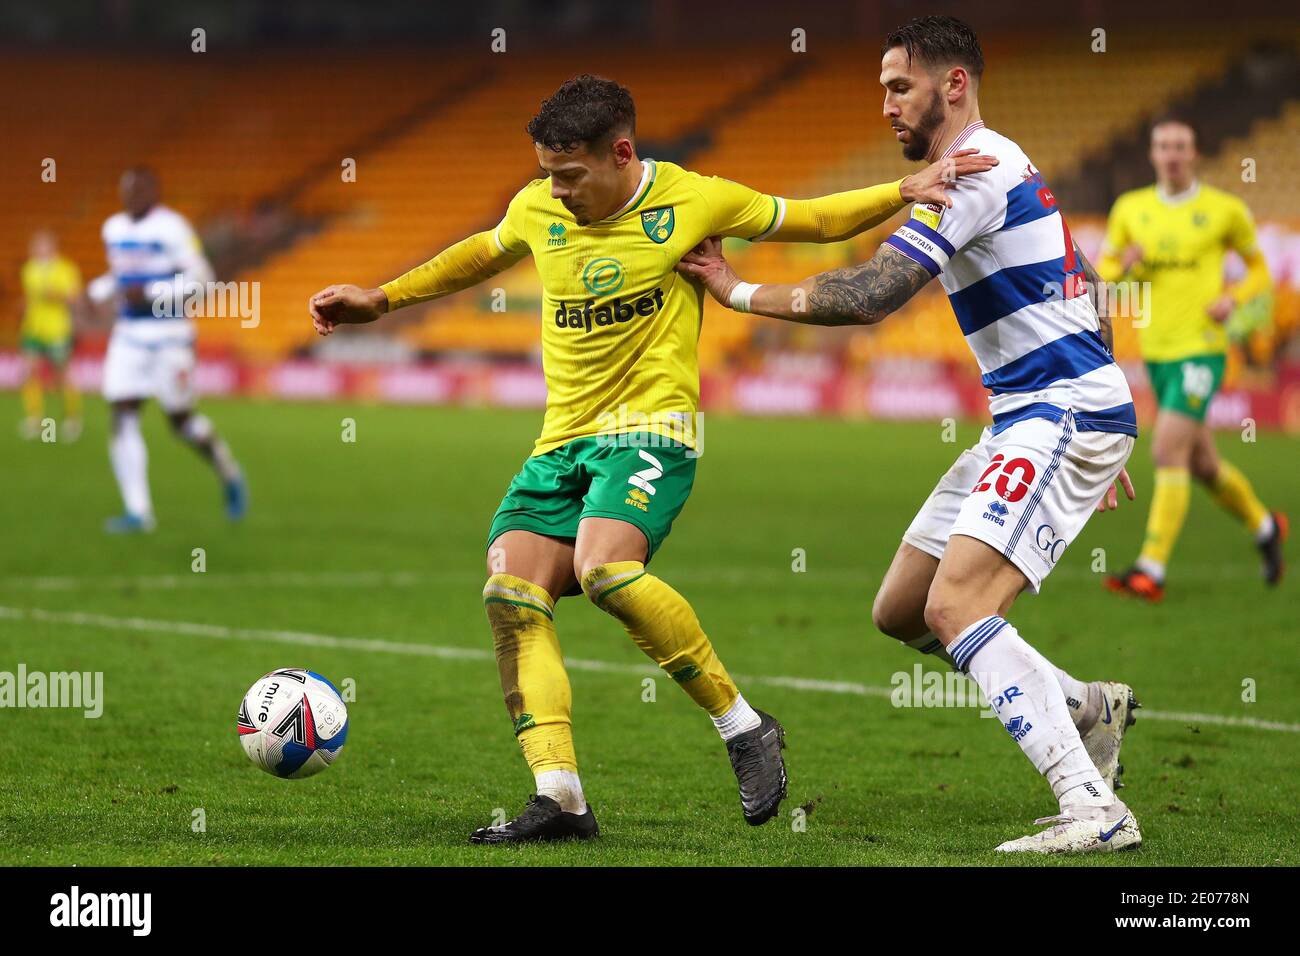 Max Aarons of Norwich City and Geoff Cameron of Queens Park Rangers in action - Norwich City v Queens Park Rangers, Sky Bet Championship, Carrow Road, Norwich, UK - 29th December 2020  Editorial Use Only - DataCo restrictions apply Stock Photo